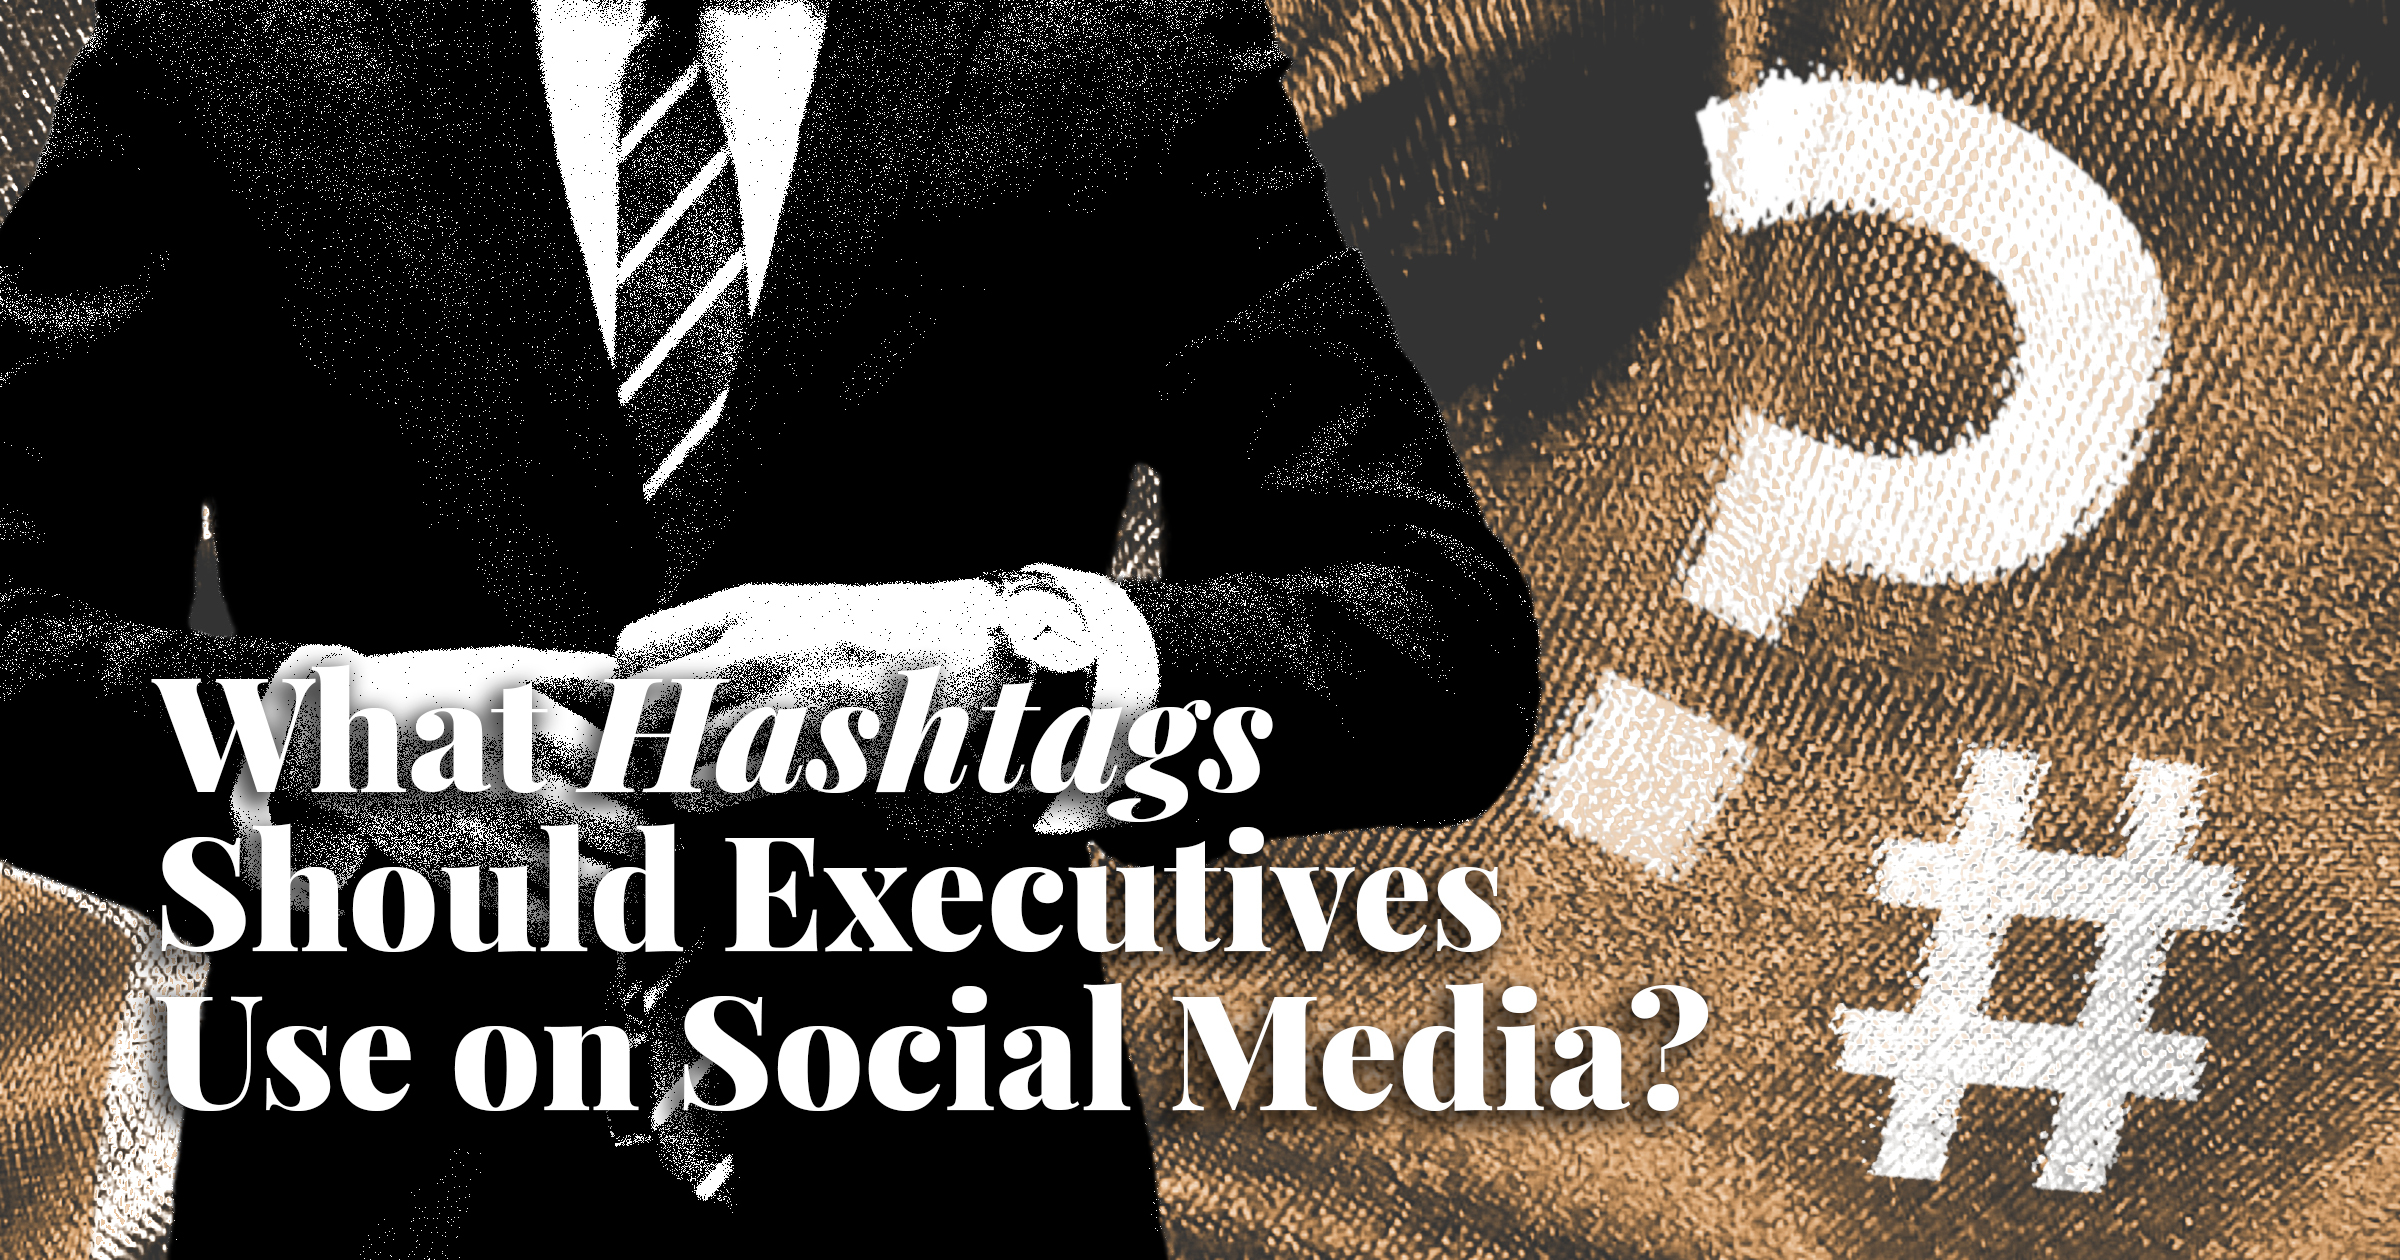 image of man in suit and title featuring title what hashtags should executives use on social media